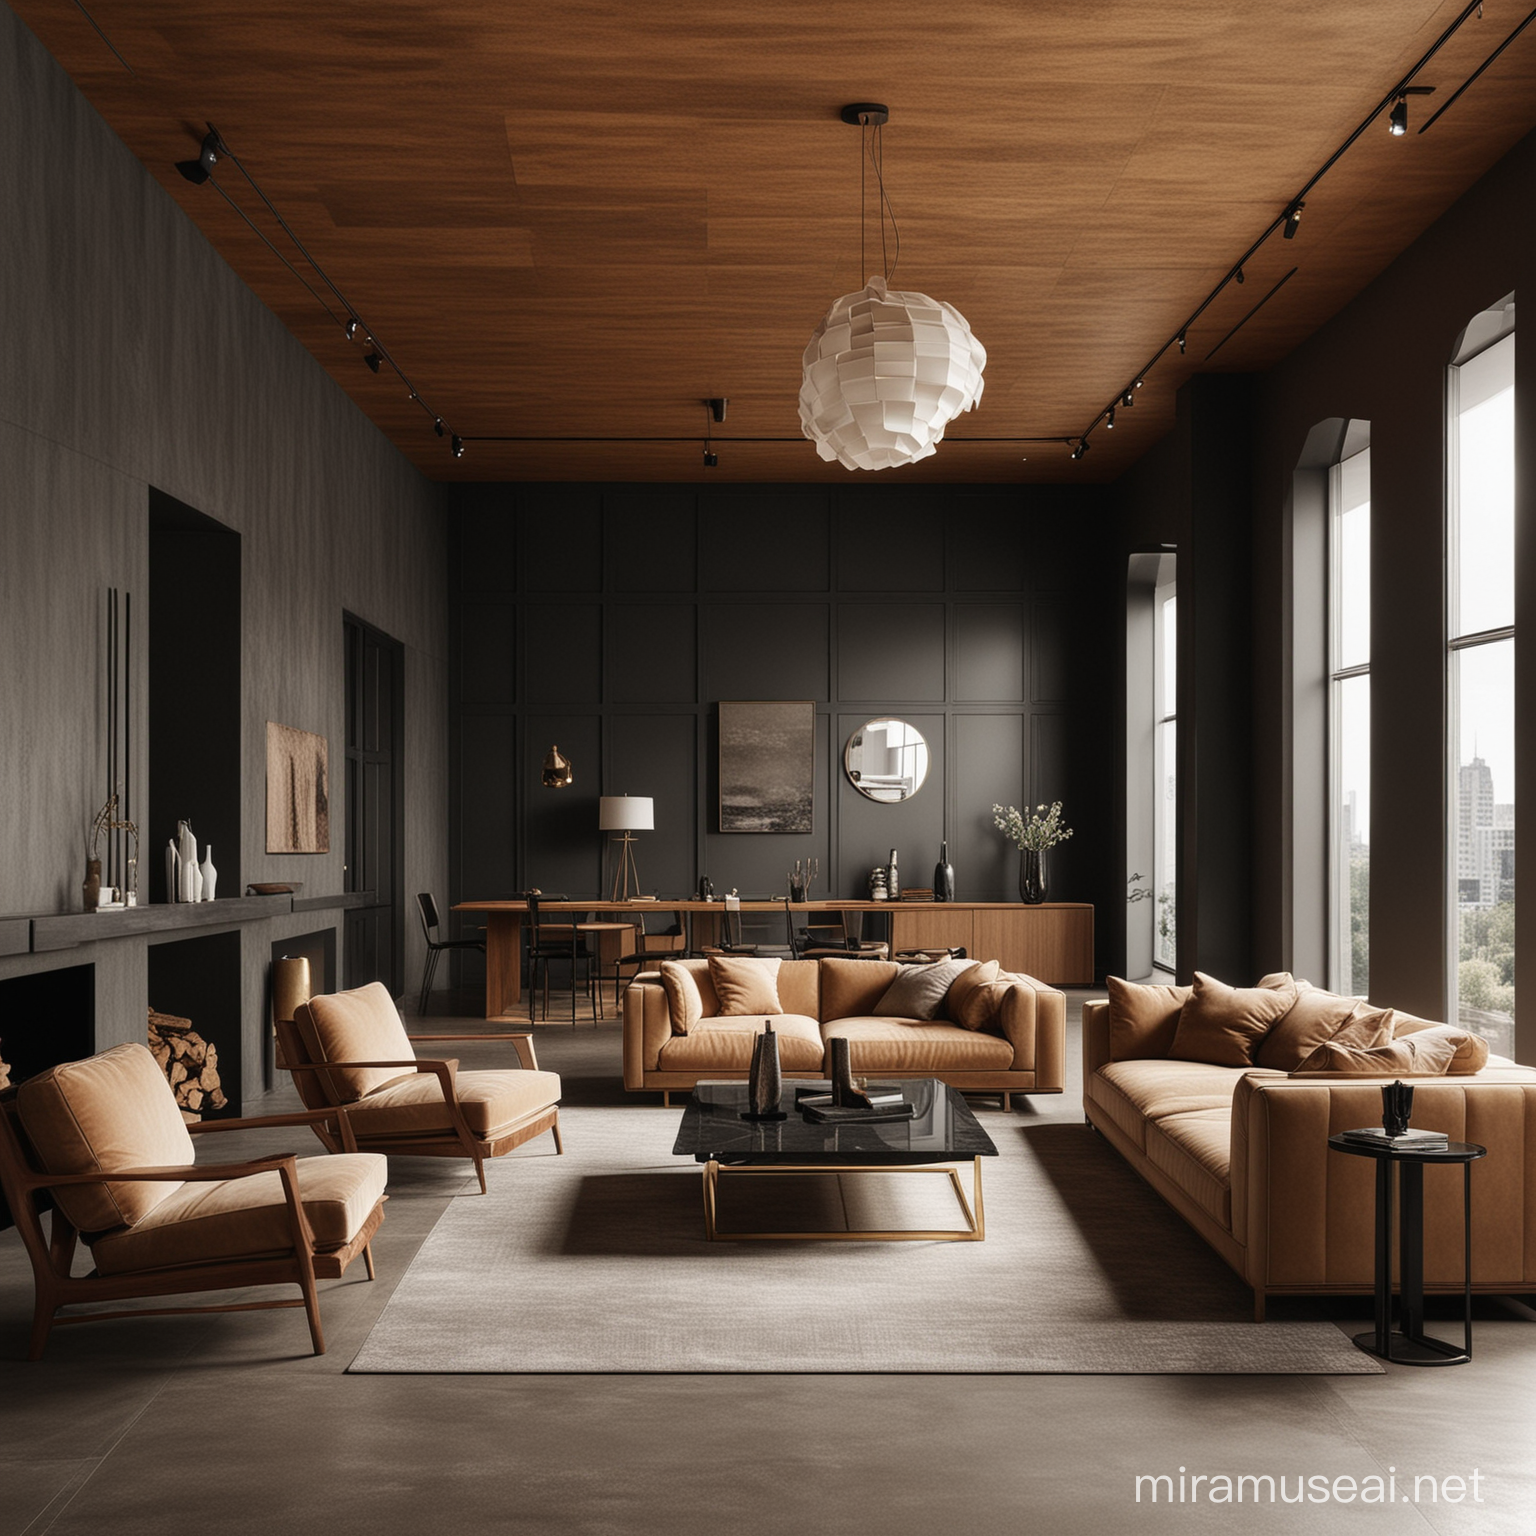 Futuristic Living Room with Black Khaki and Gold Accents